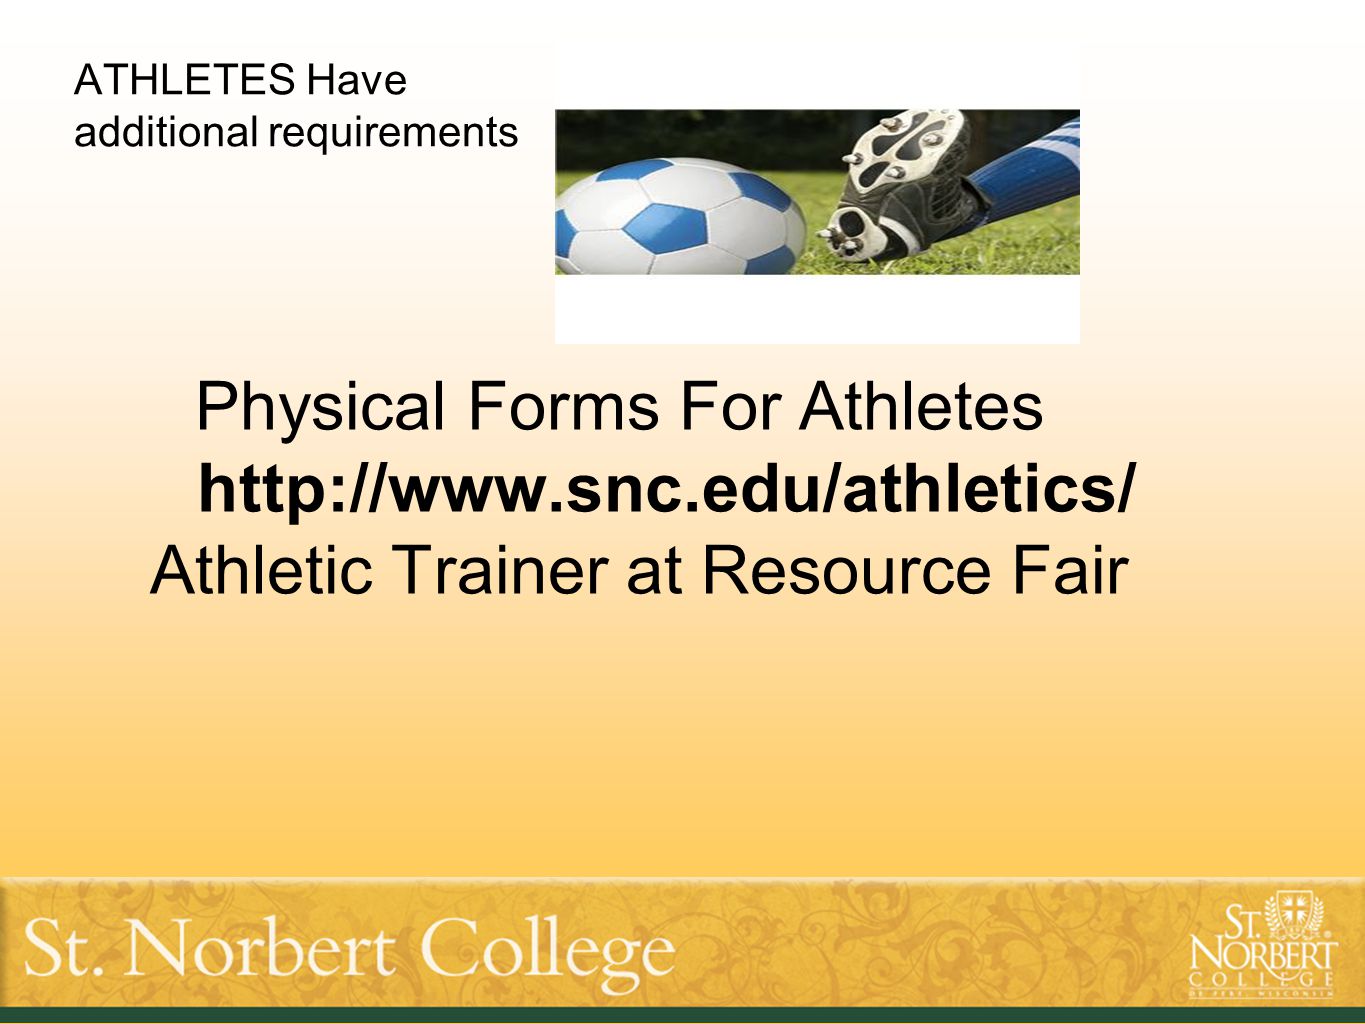 ATHLETES Have additional requirements Physical Forms For Athletes   Athletic Trainer at Resource Fair